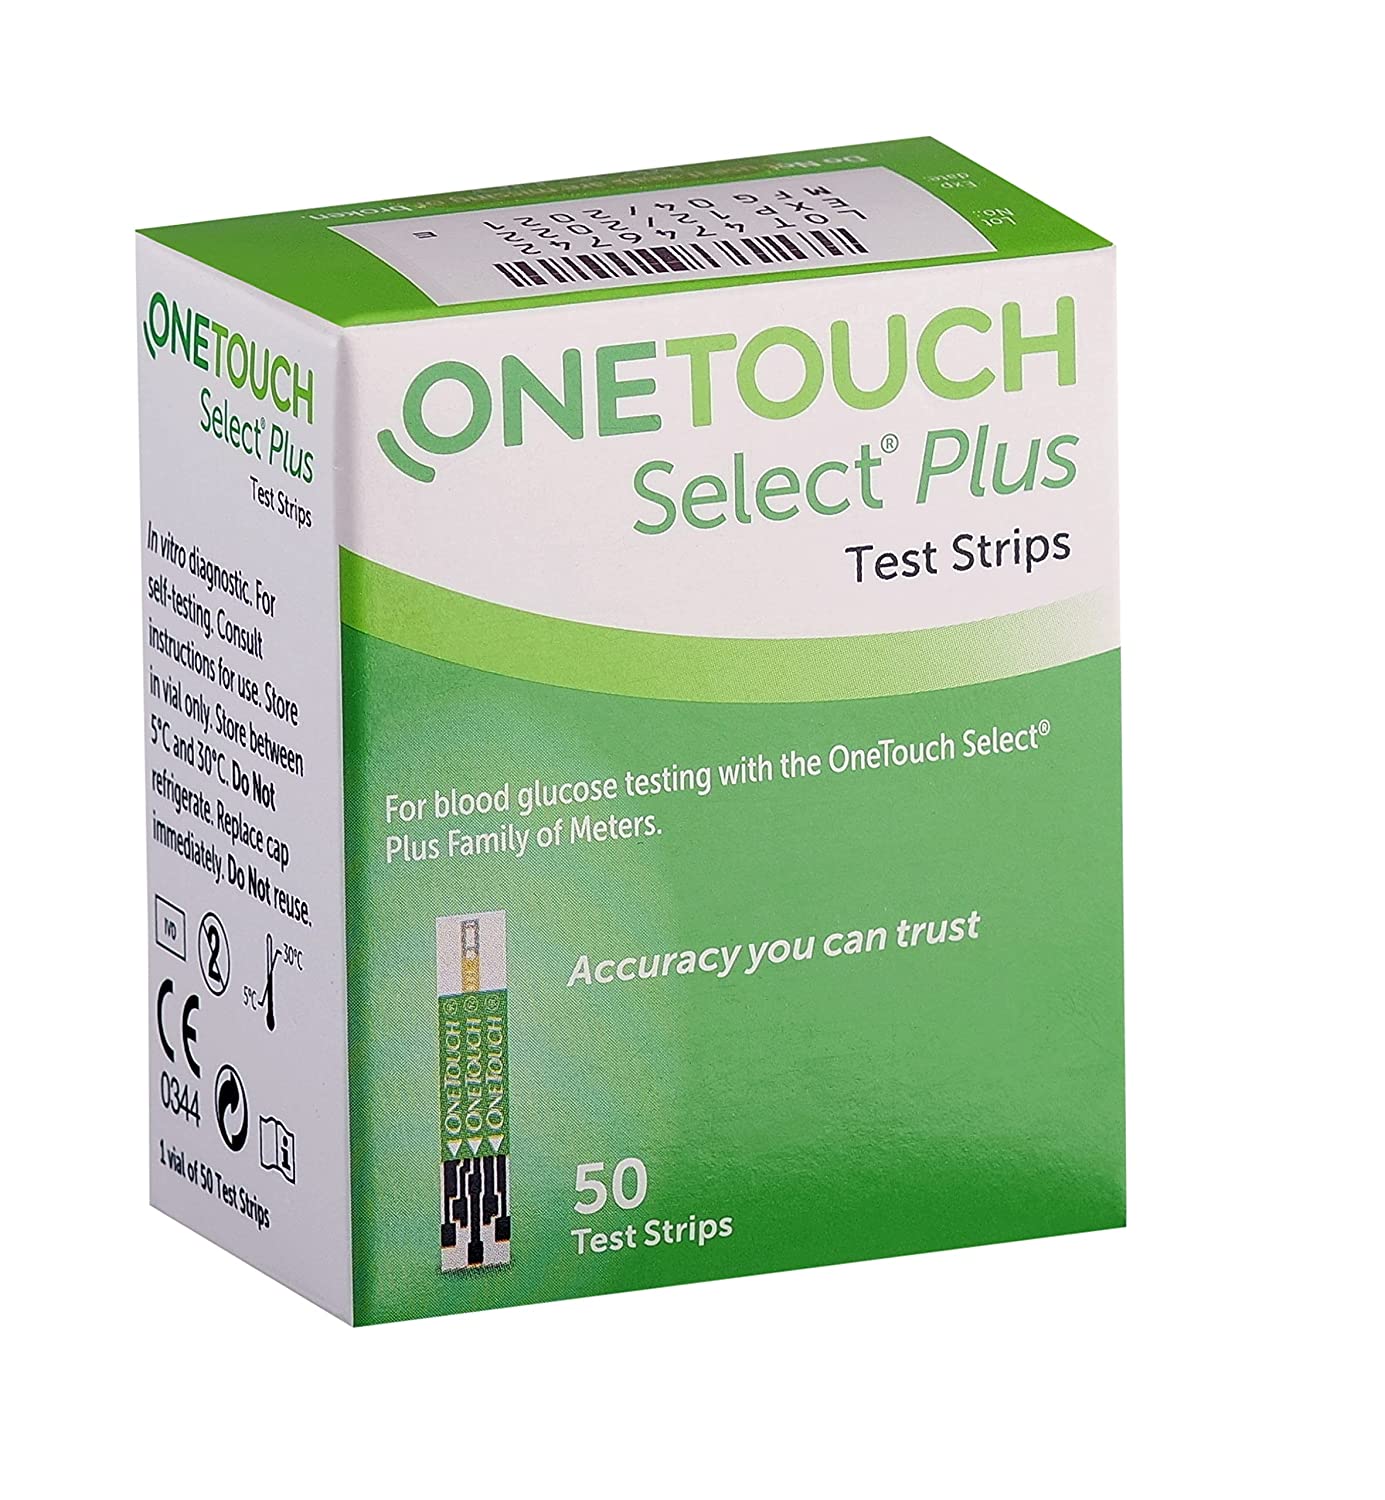 One Touch Select Plus 50 strips pack